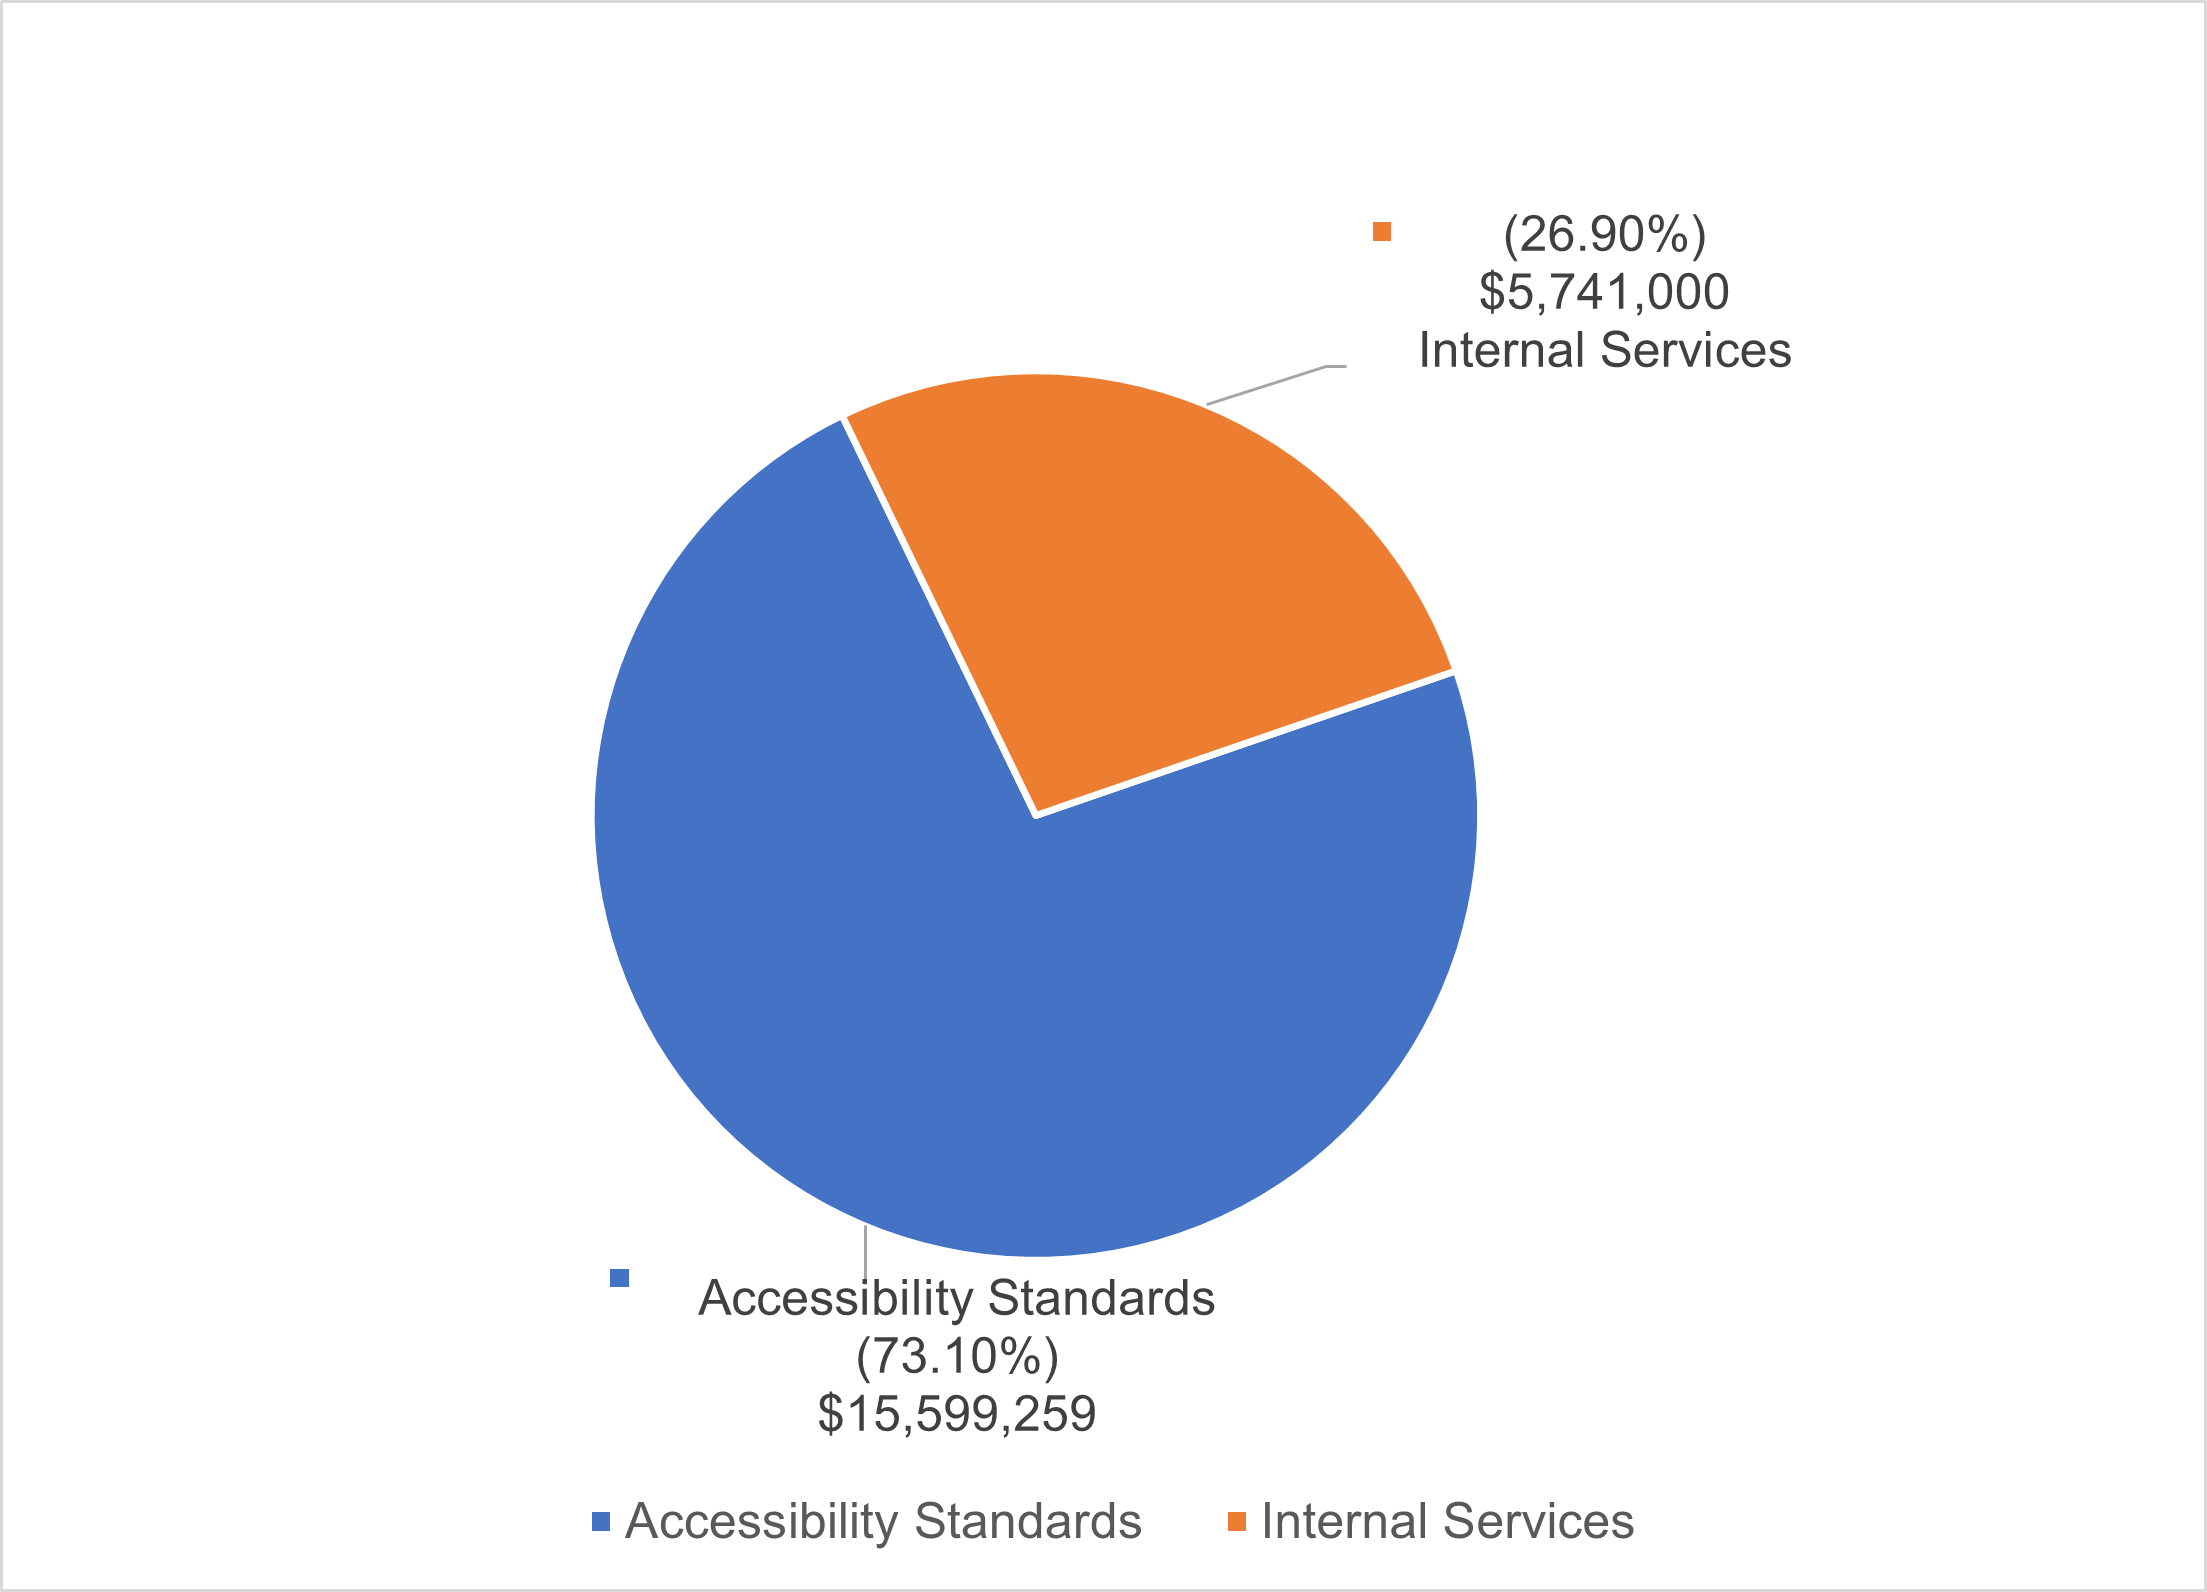 A graph showing departmental spending, indicating the anticipated percentage of spending for the core responsibility and internal services for the fiscal year 2024 to 2025. The organization will spend 73.1% of its funding on accessibility standards and 26.9% on internal services.